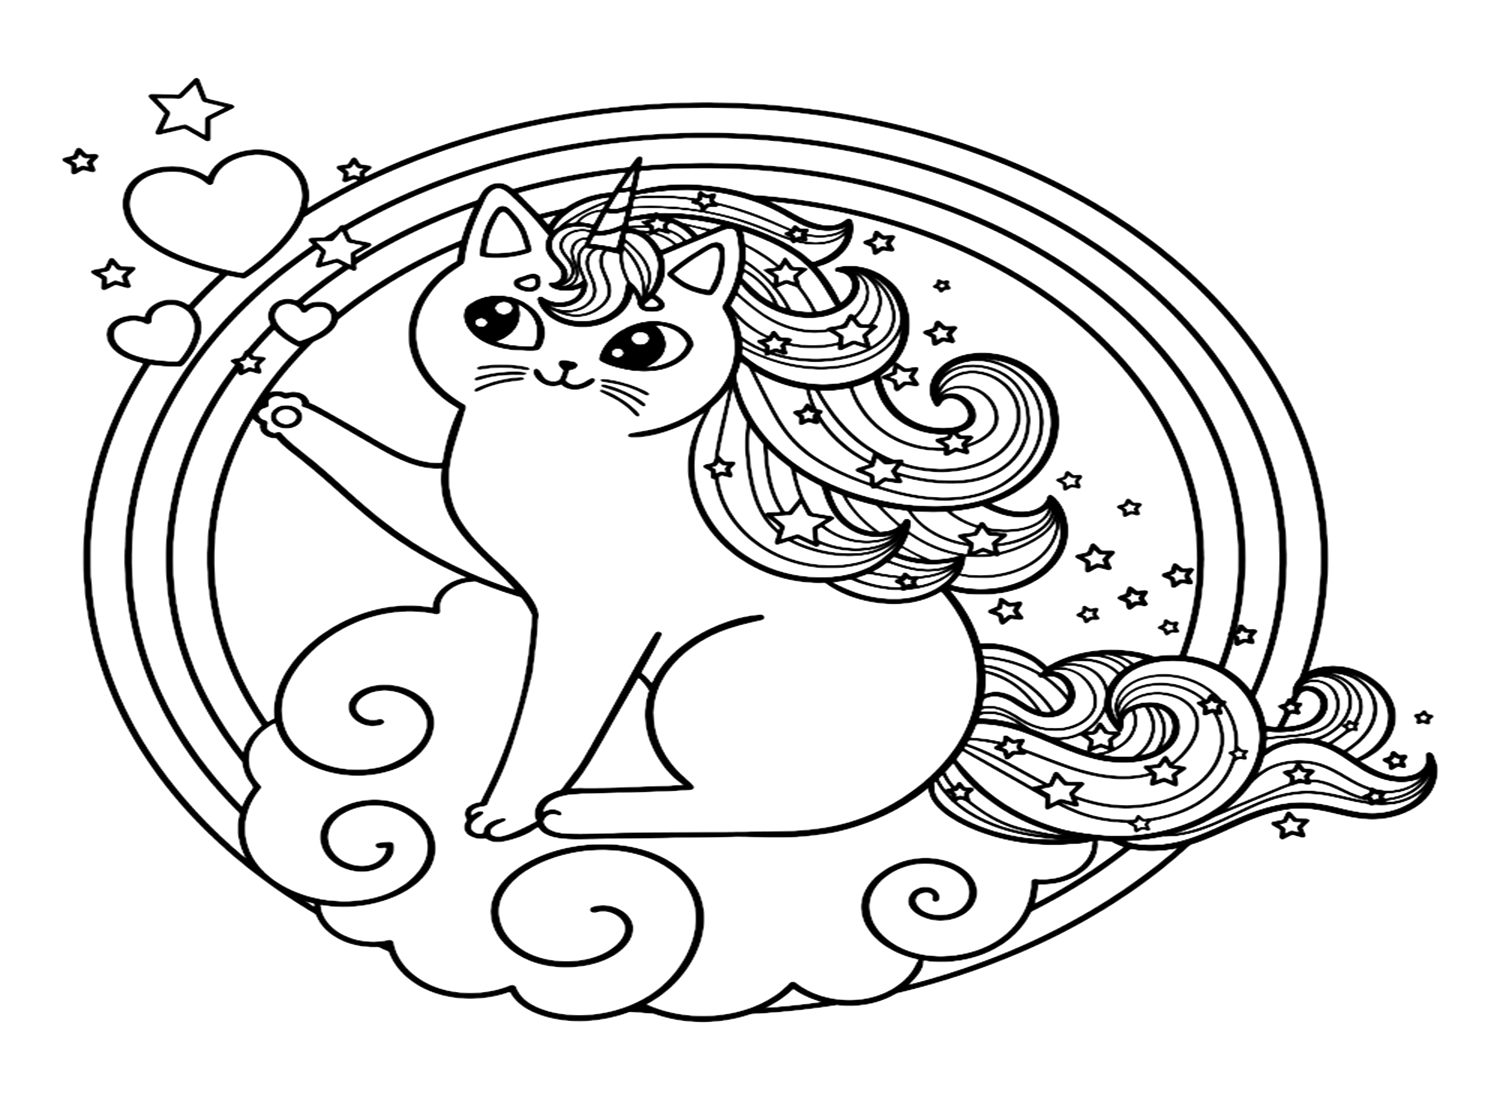 Rainbow And Unicorn Coloring Page